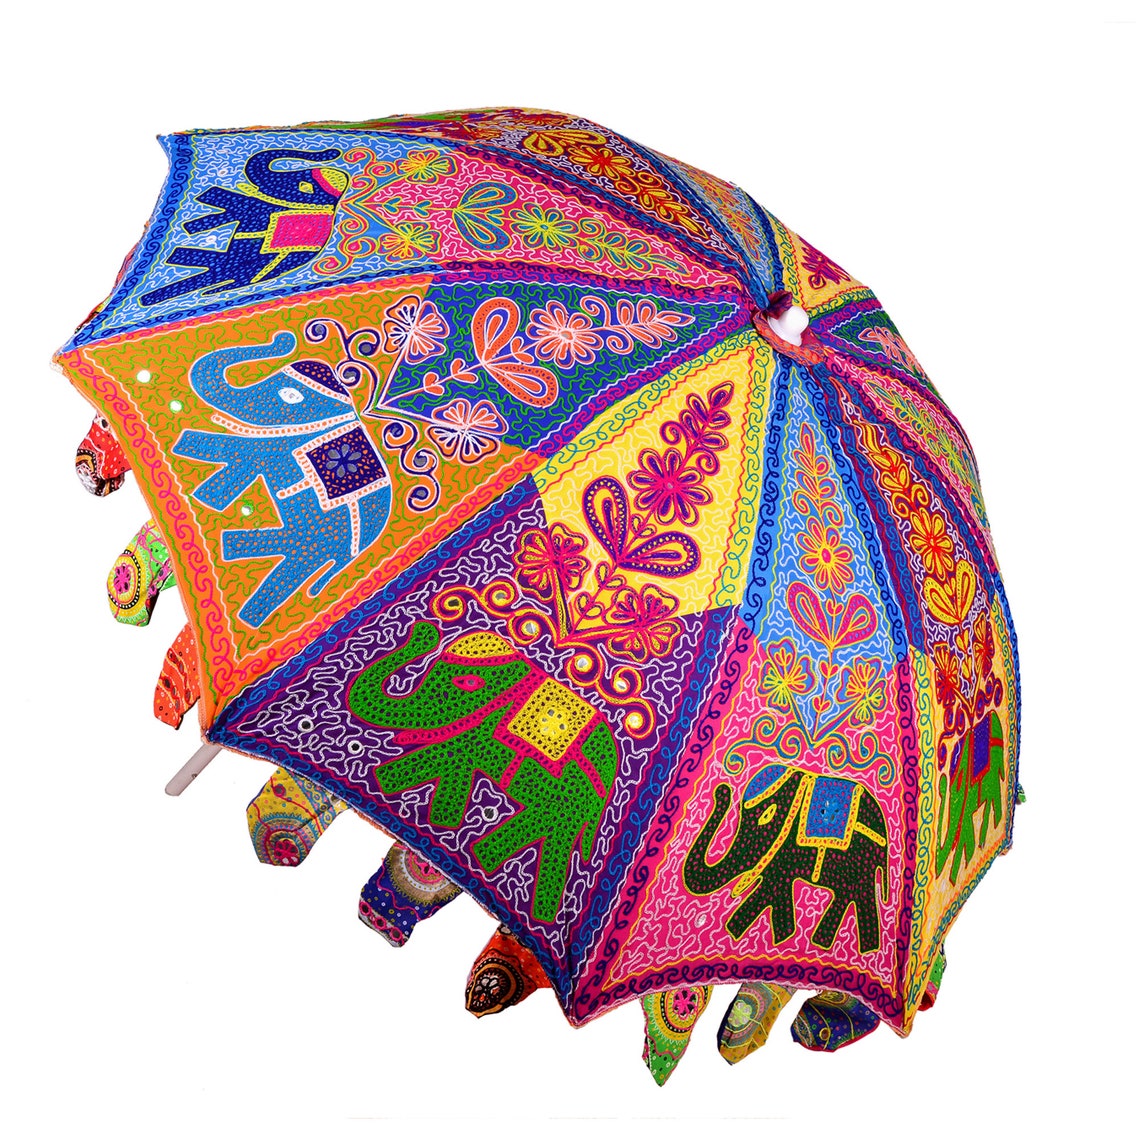 Rajasthani Multicolor Embroidery Umbrella Large Outdoor Patio | Etsy